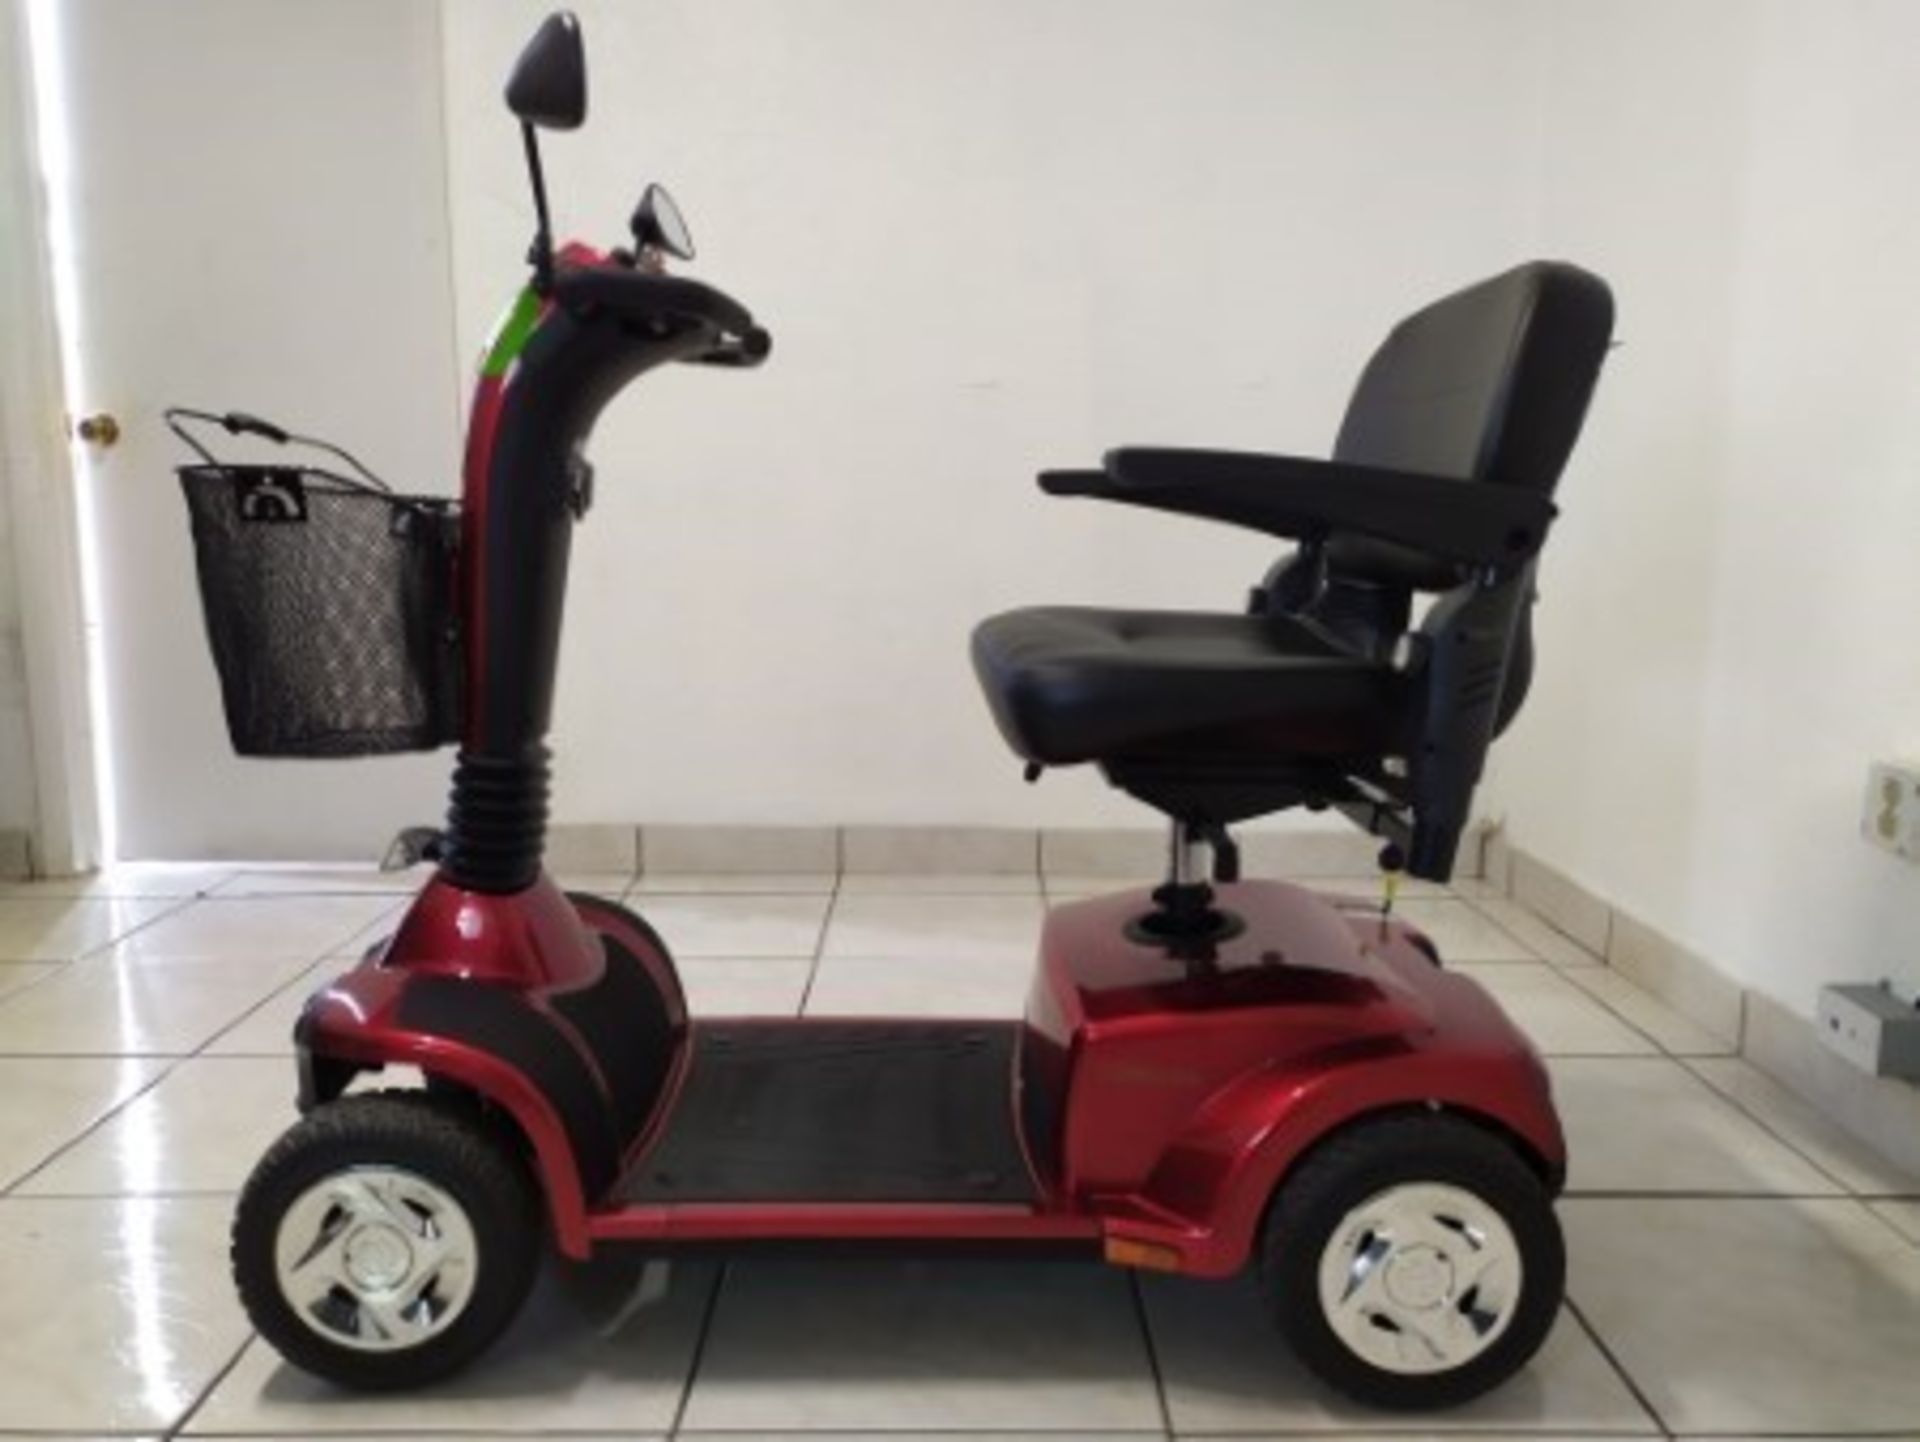 2016 GOLDEN COMPANION GC440 4-WHEEL SCOOTER WITH CHARGER & BASKET - RED - 400LB CAPACITY - SERIAL No - Image 2 of 6